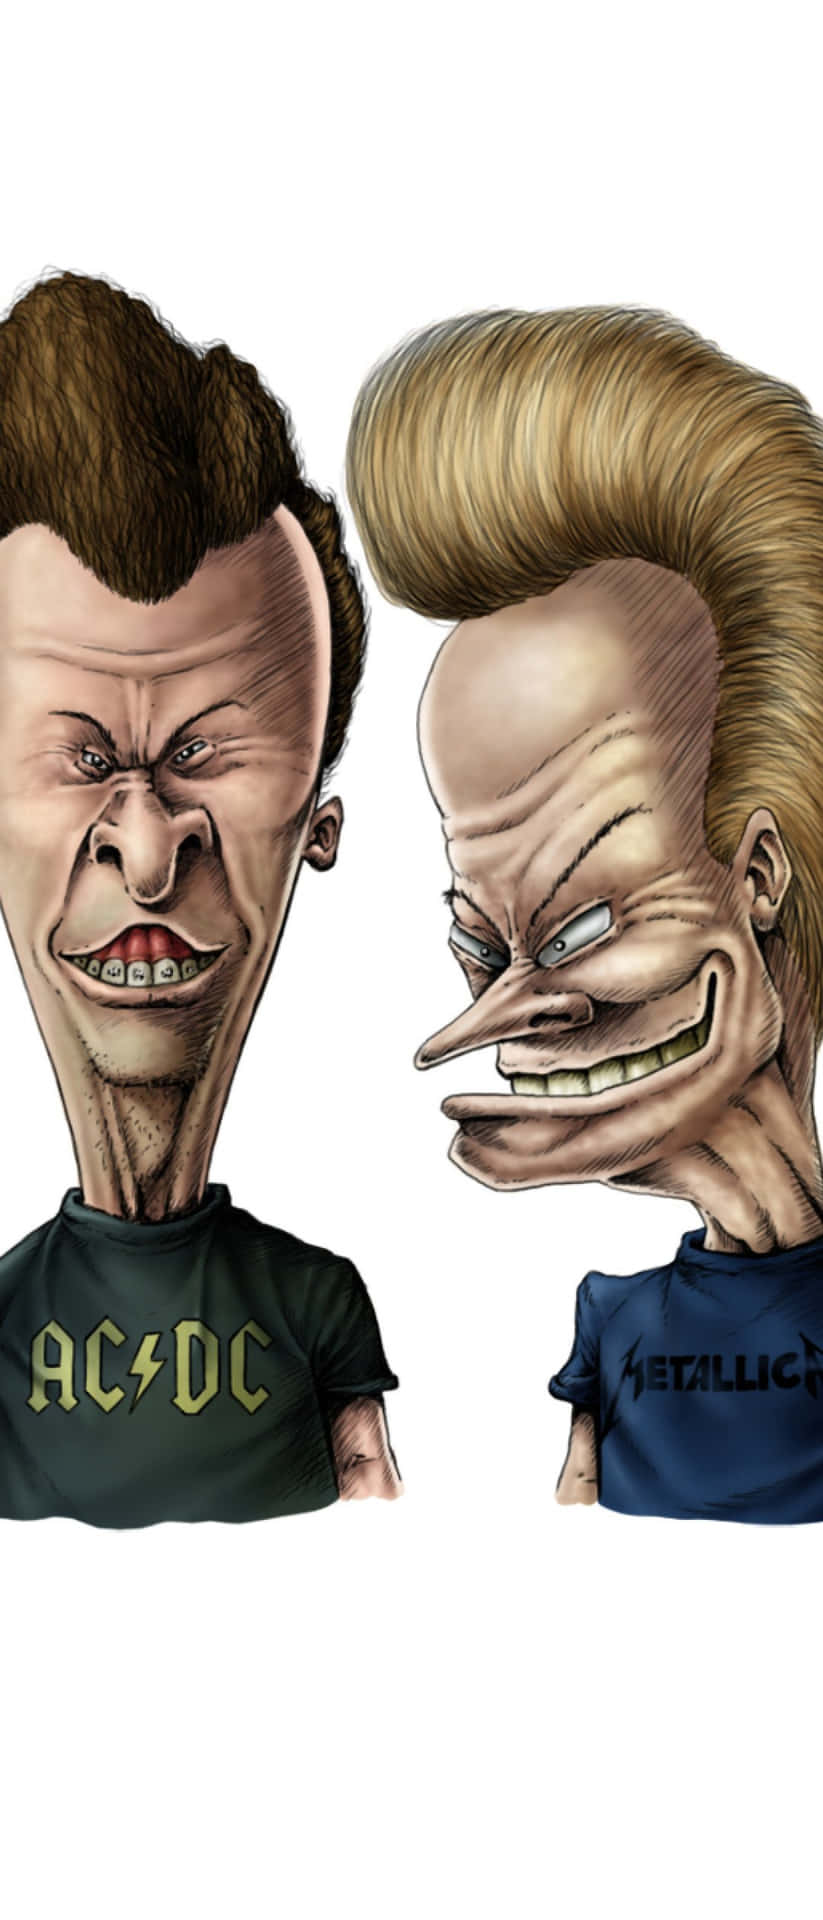 Beavis and Butthead rocking out